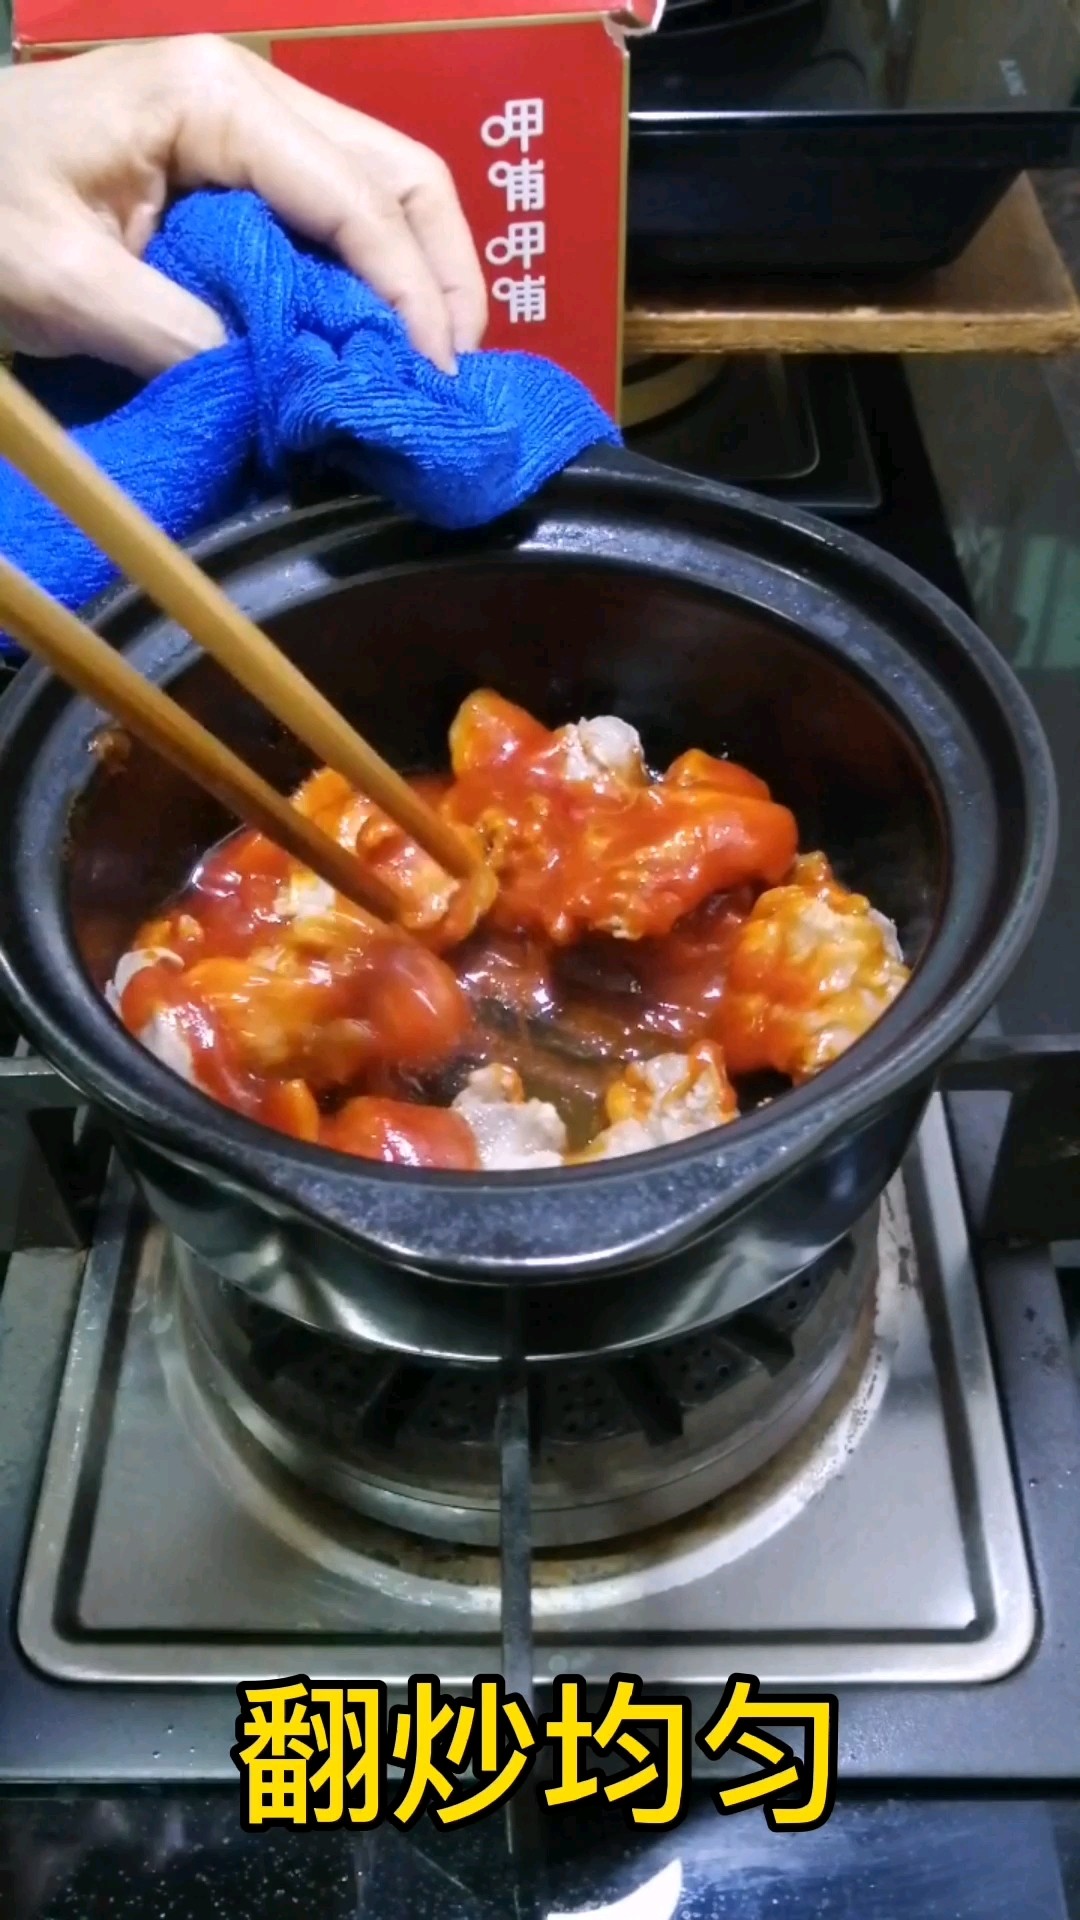 Stewed Baby Vegetables and Pork Ribs with Tomato Hot Pot Base recipe